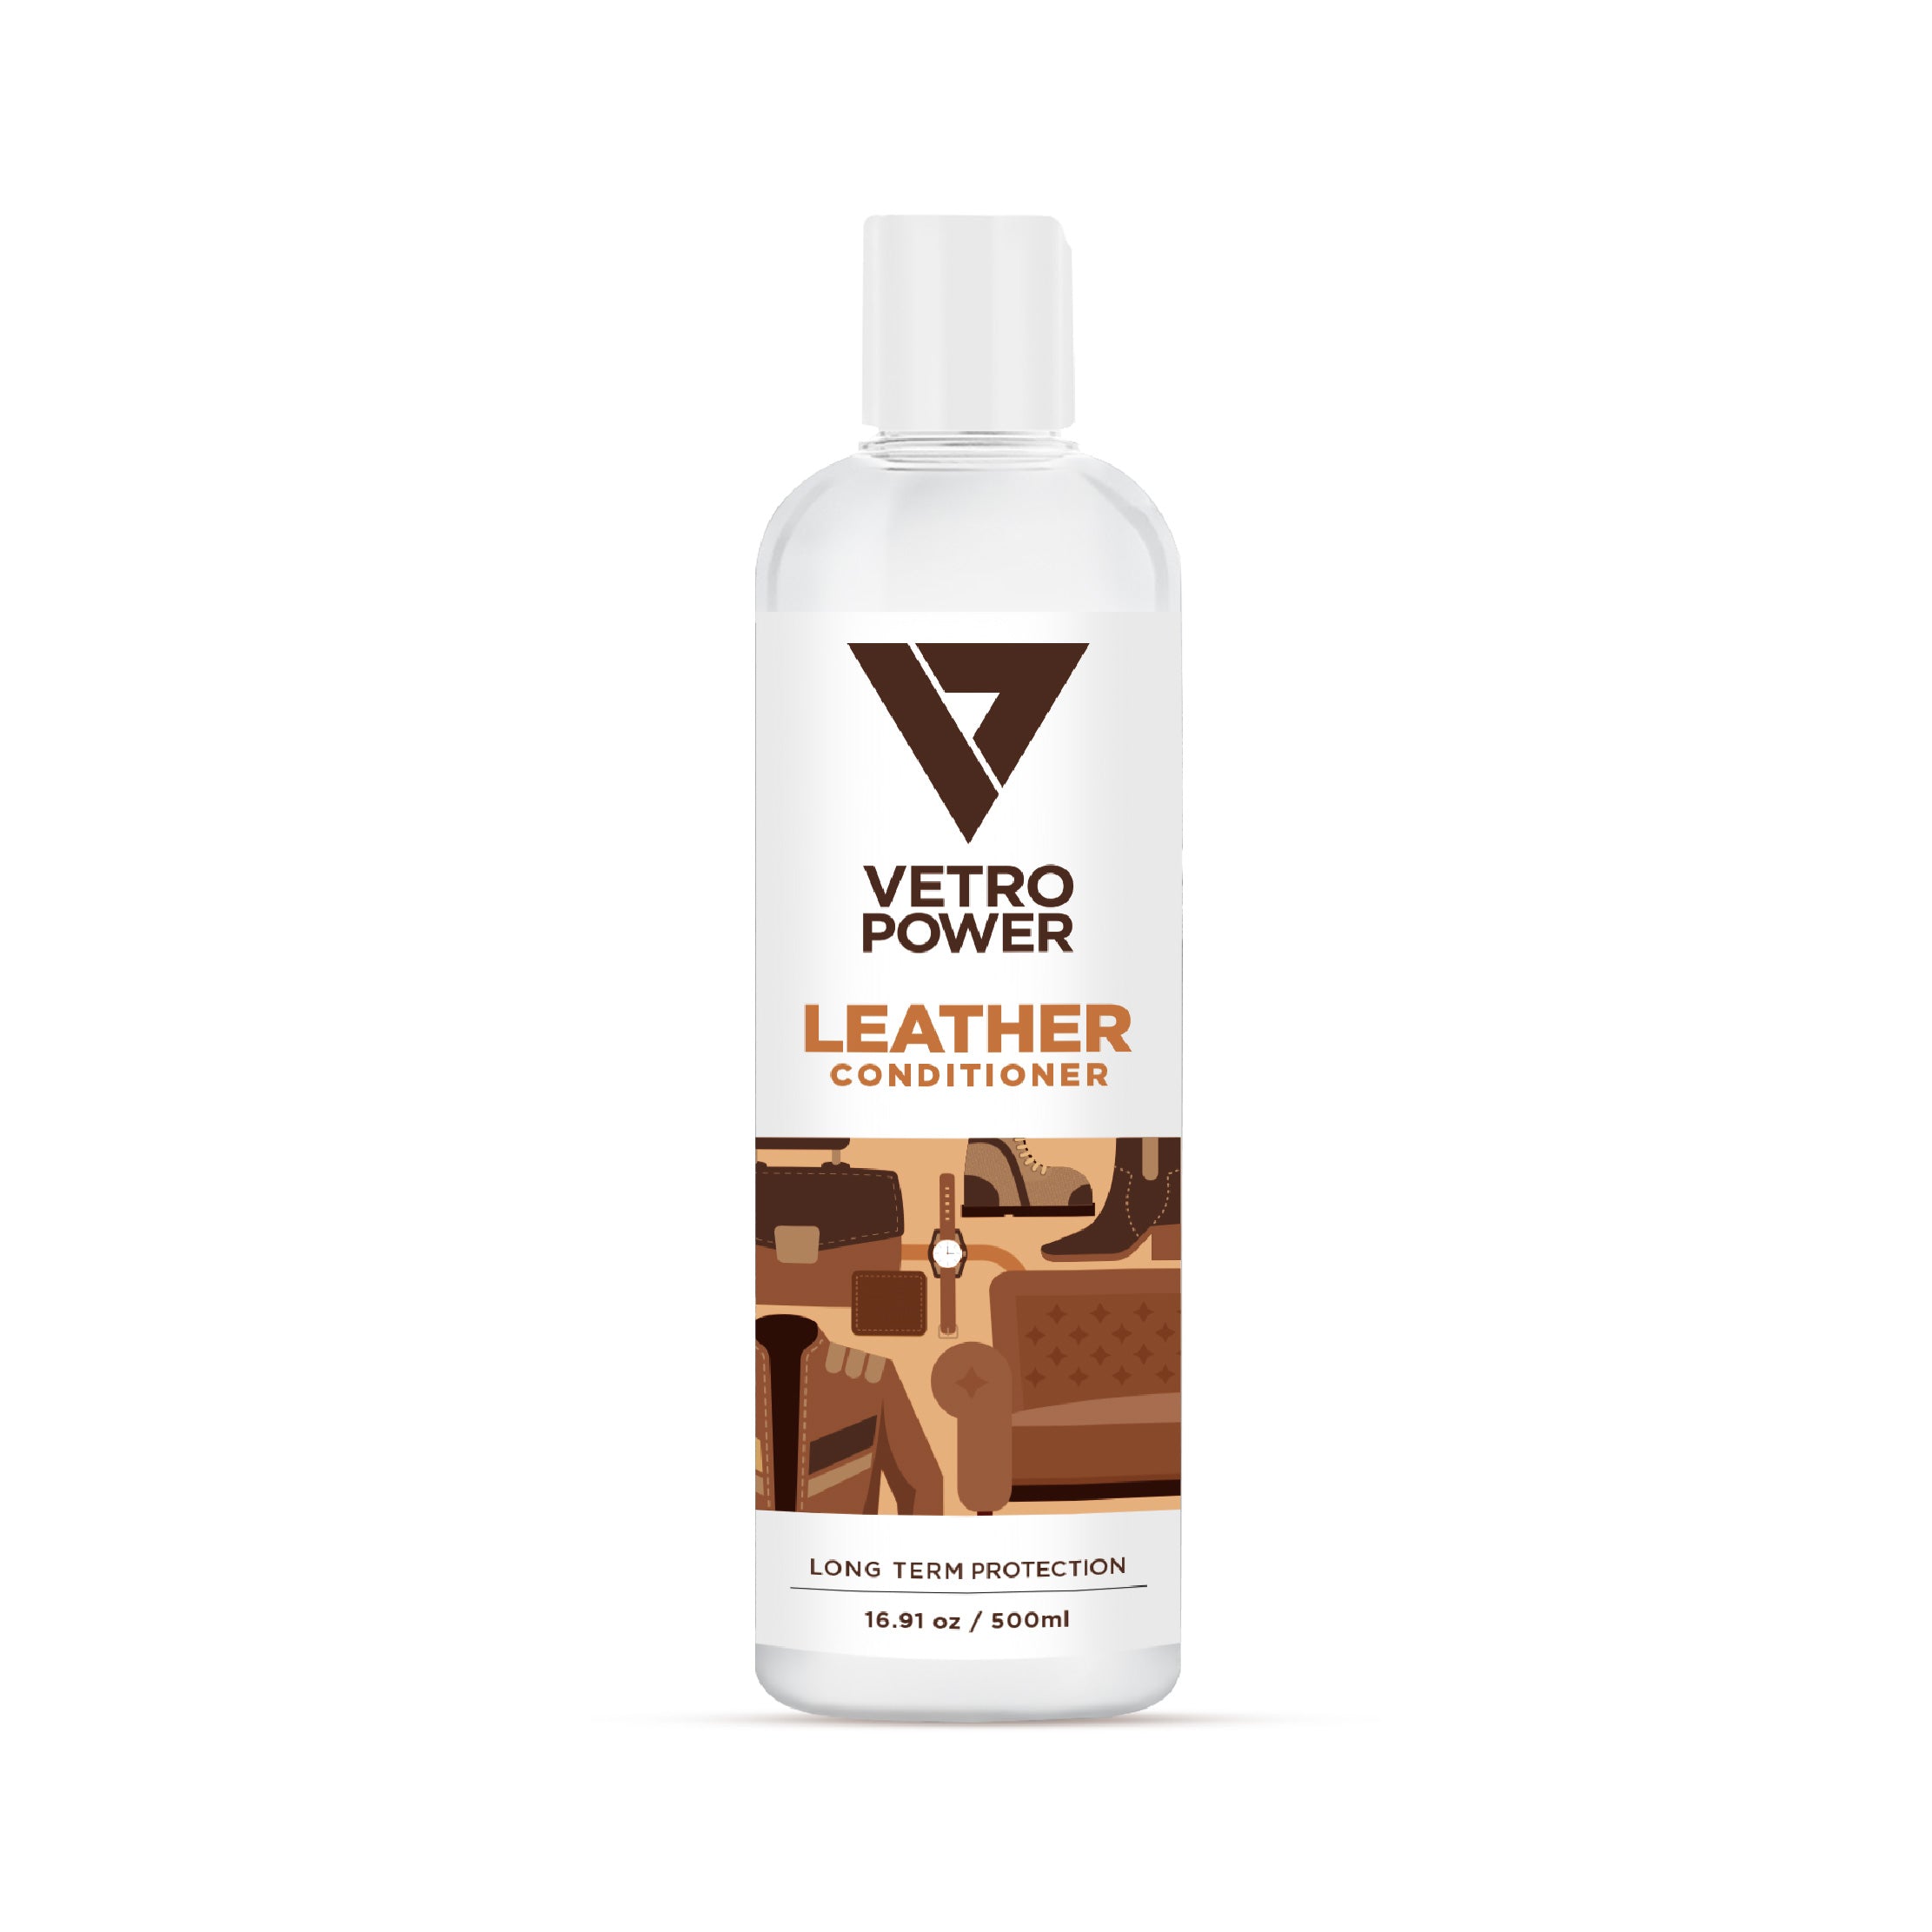 Vetro Power Leather Conditioner Product Image